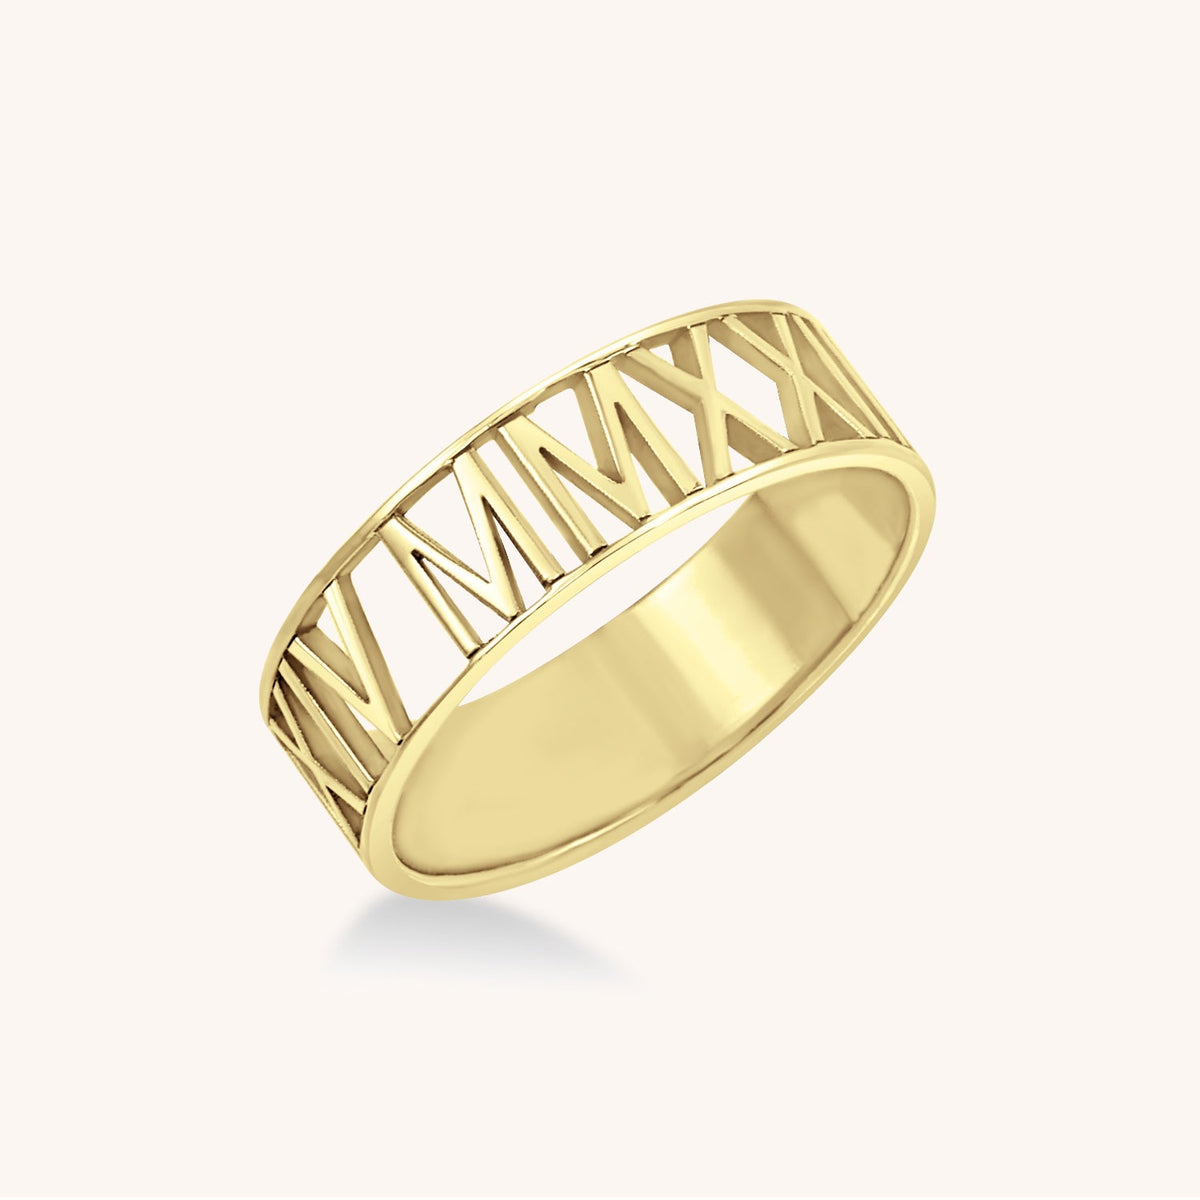 Roman Numeral Date Ring (Larger Sizes)